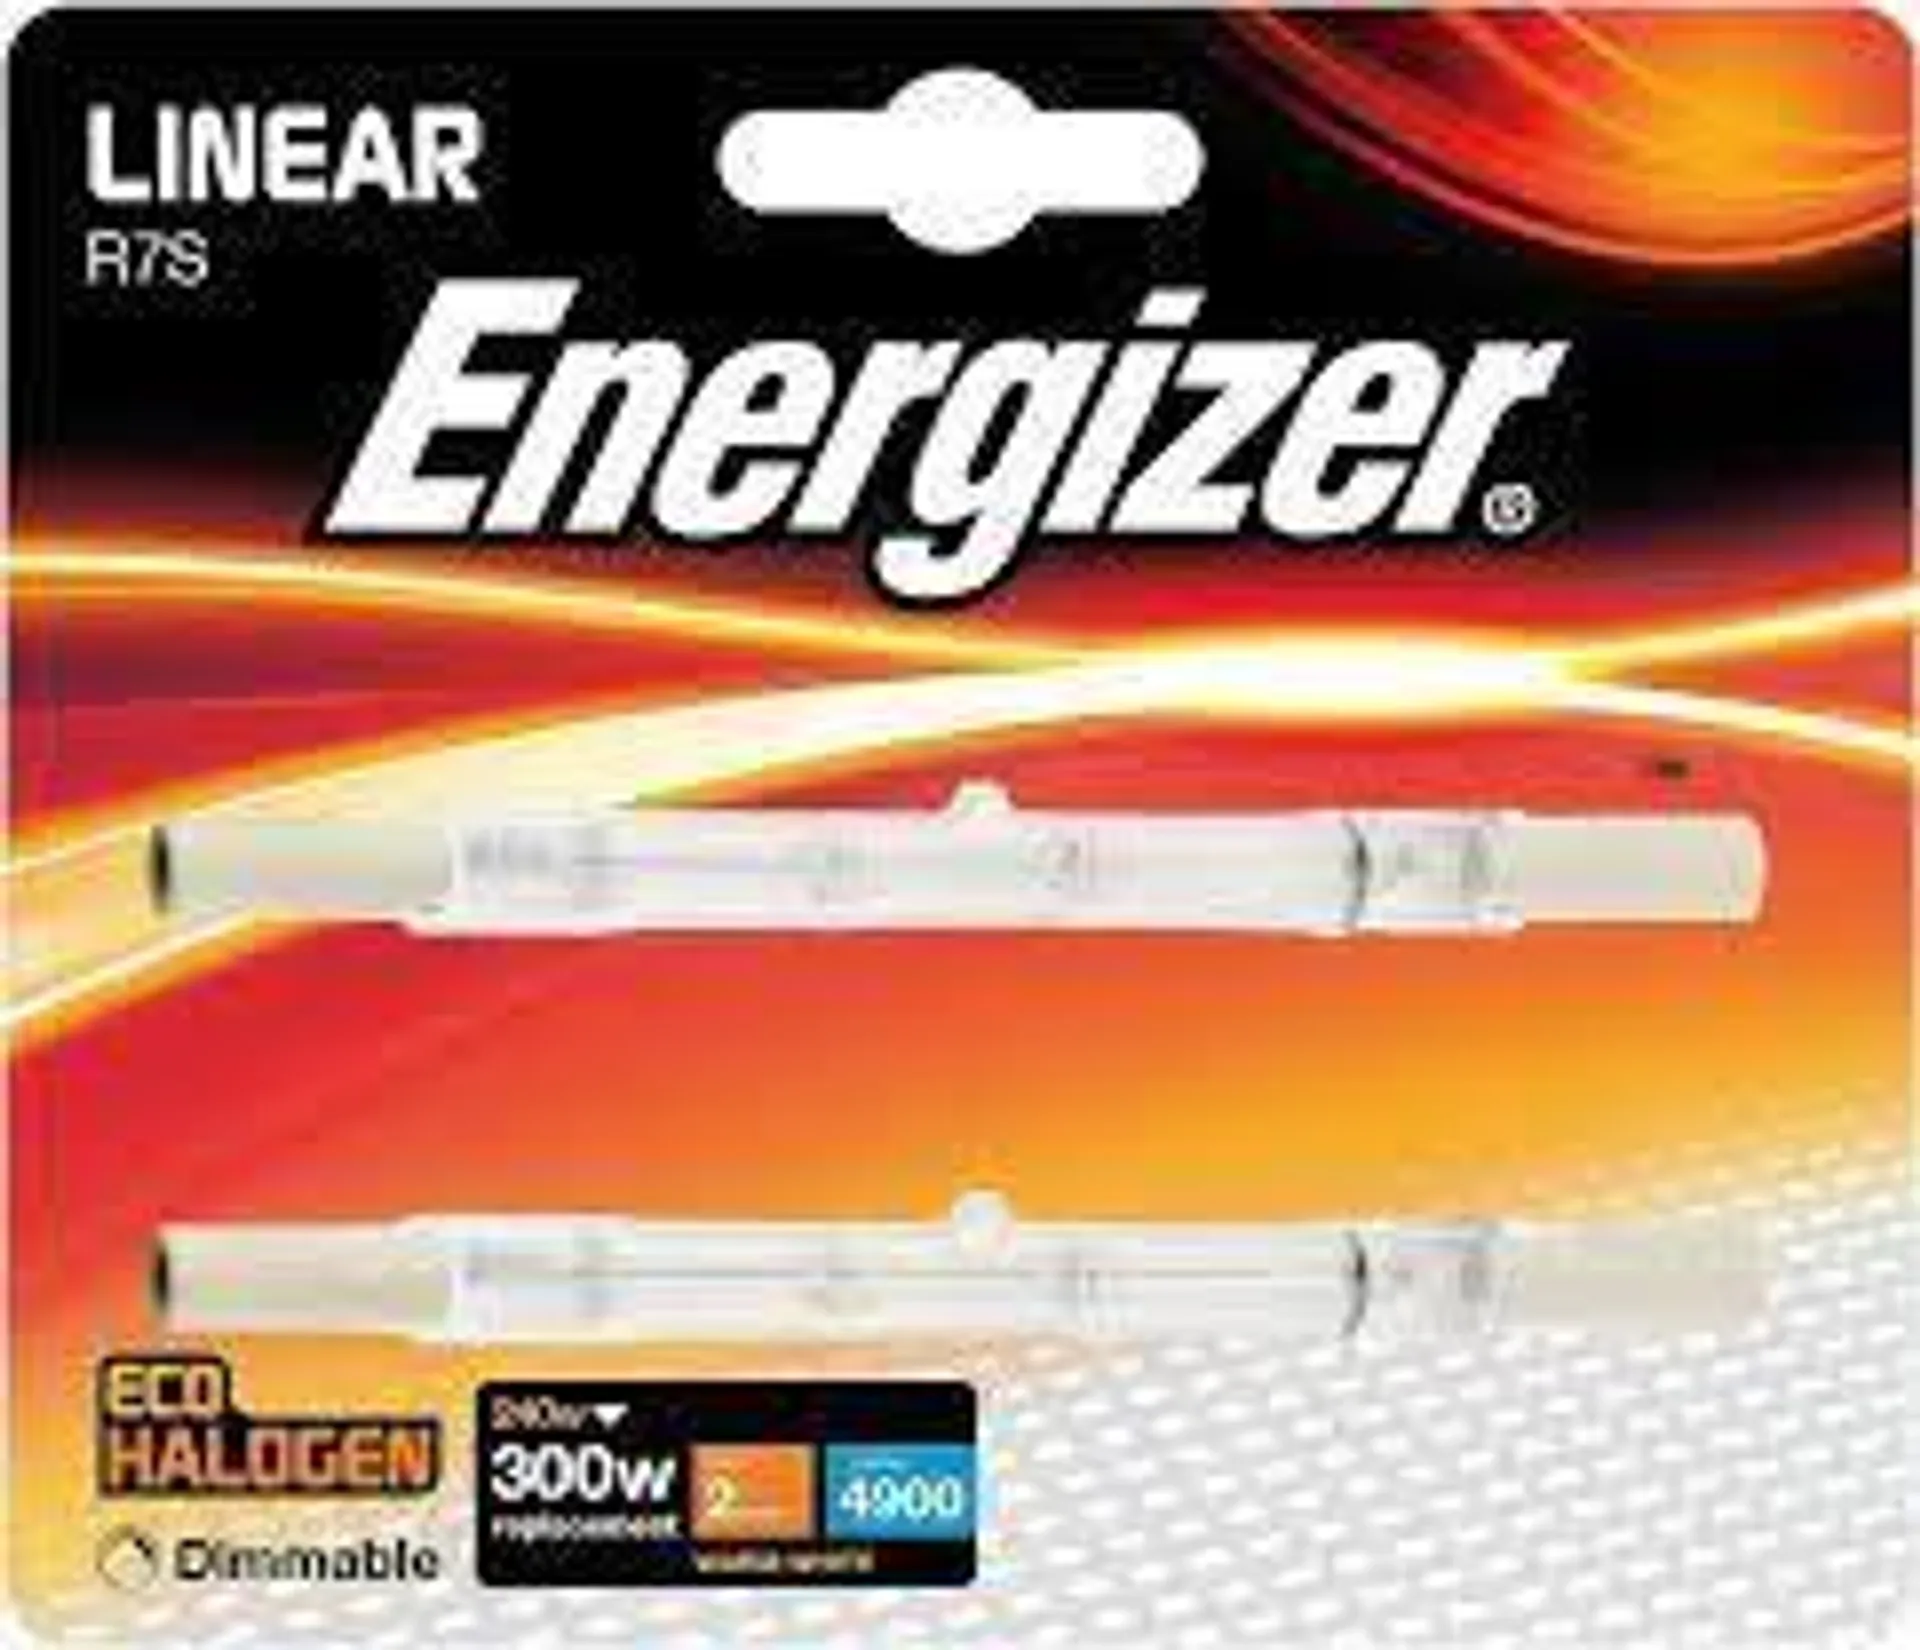 Energizer Halogen Linear 230w Dimmable R7S Bulbs